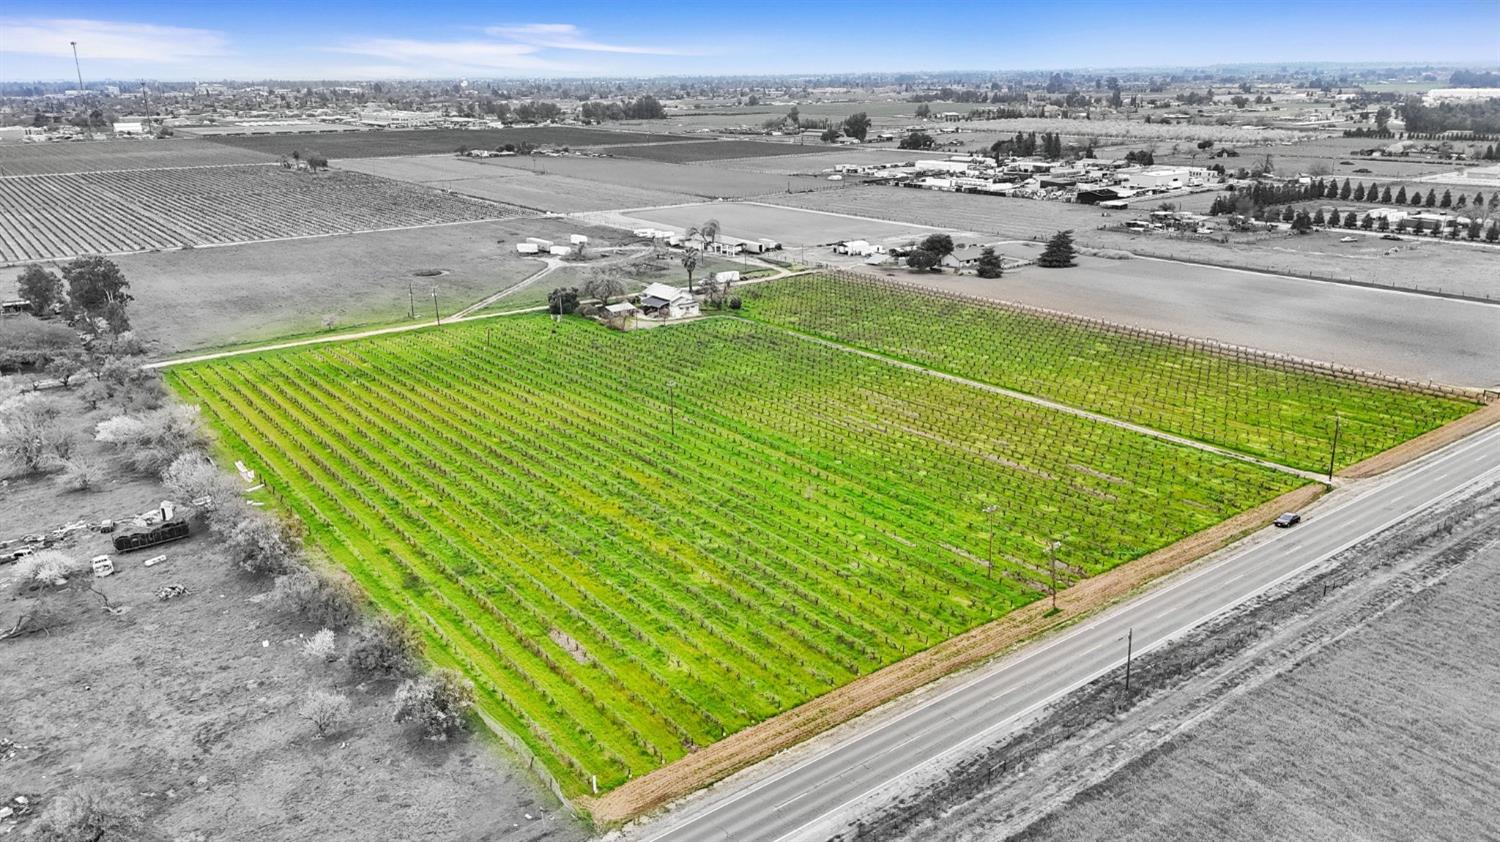 Photo of 14260 Rd 29 in Madera, CA